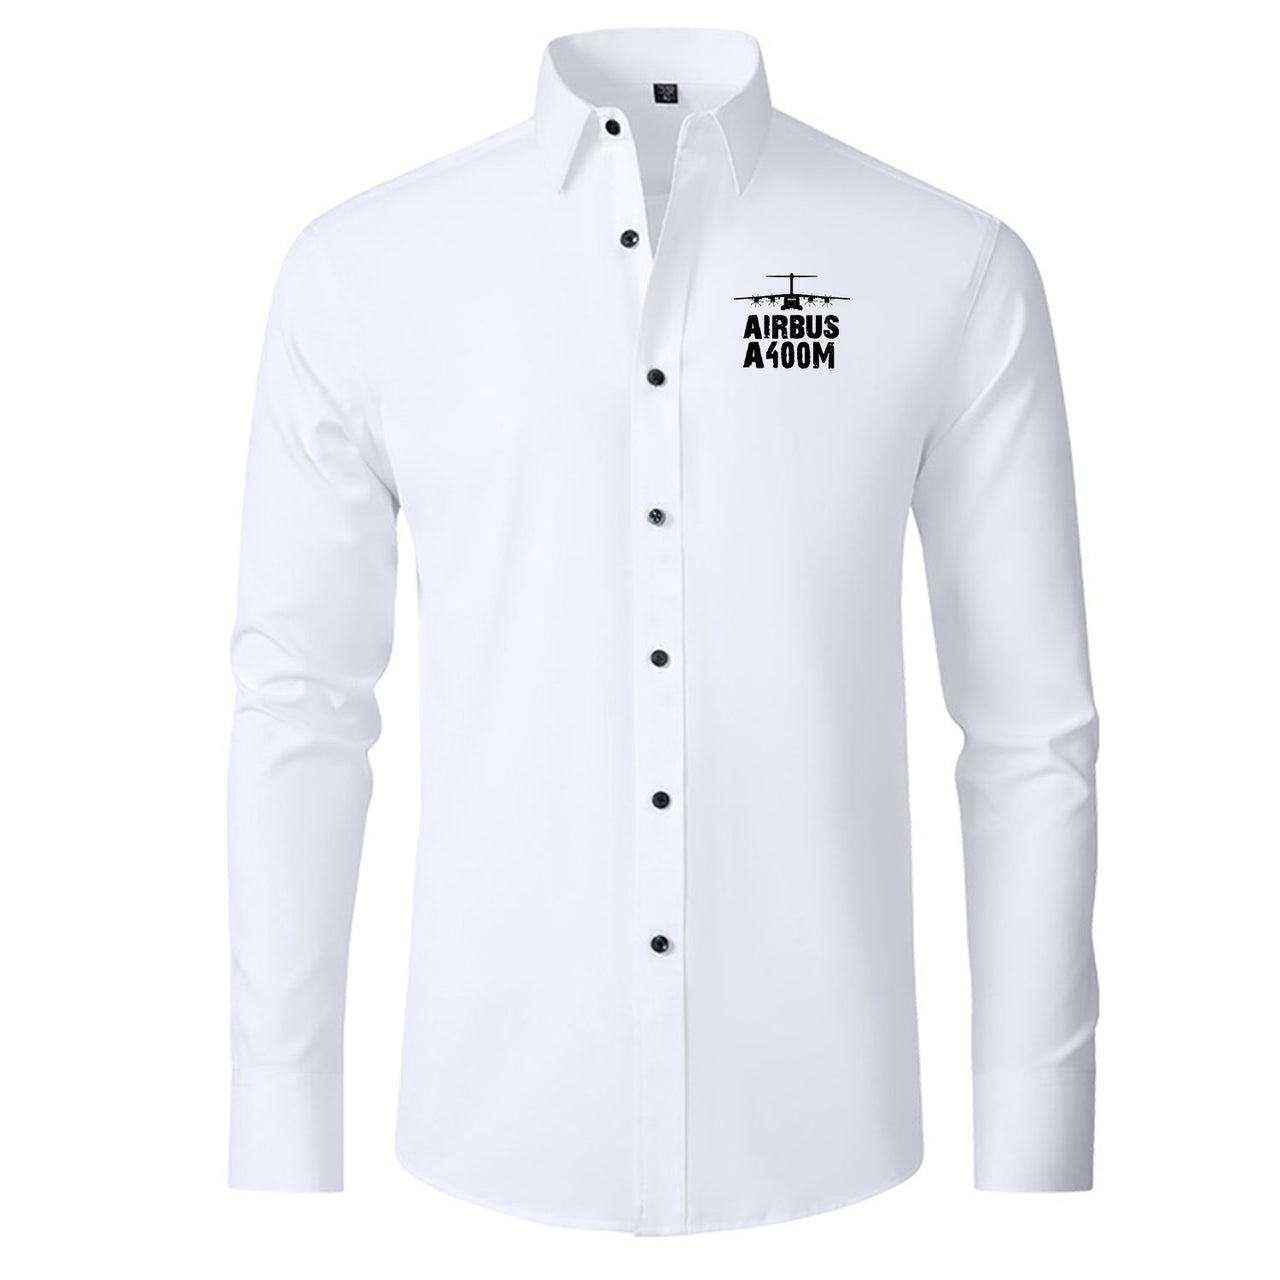 Airbus A400M & Plane Designed Long Sleeve Shirts